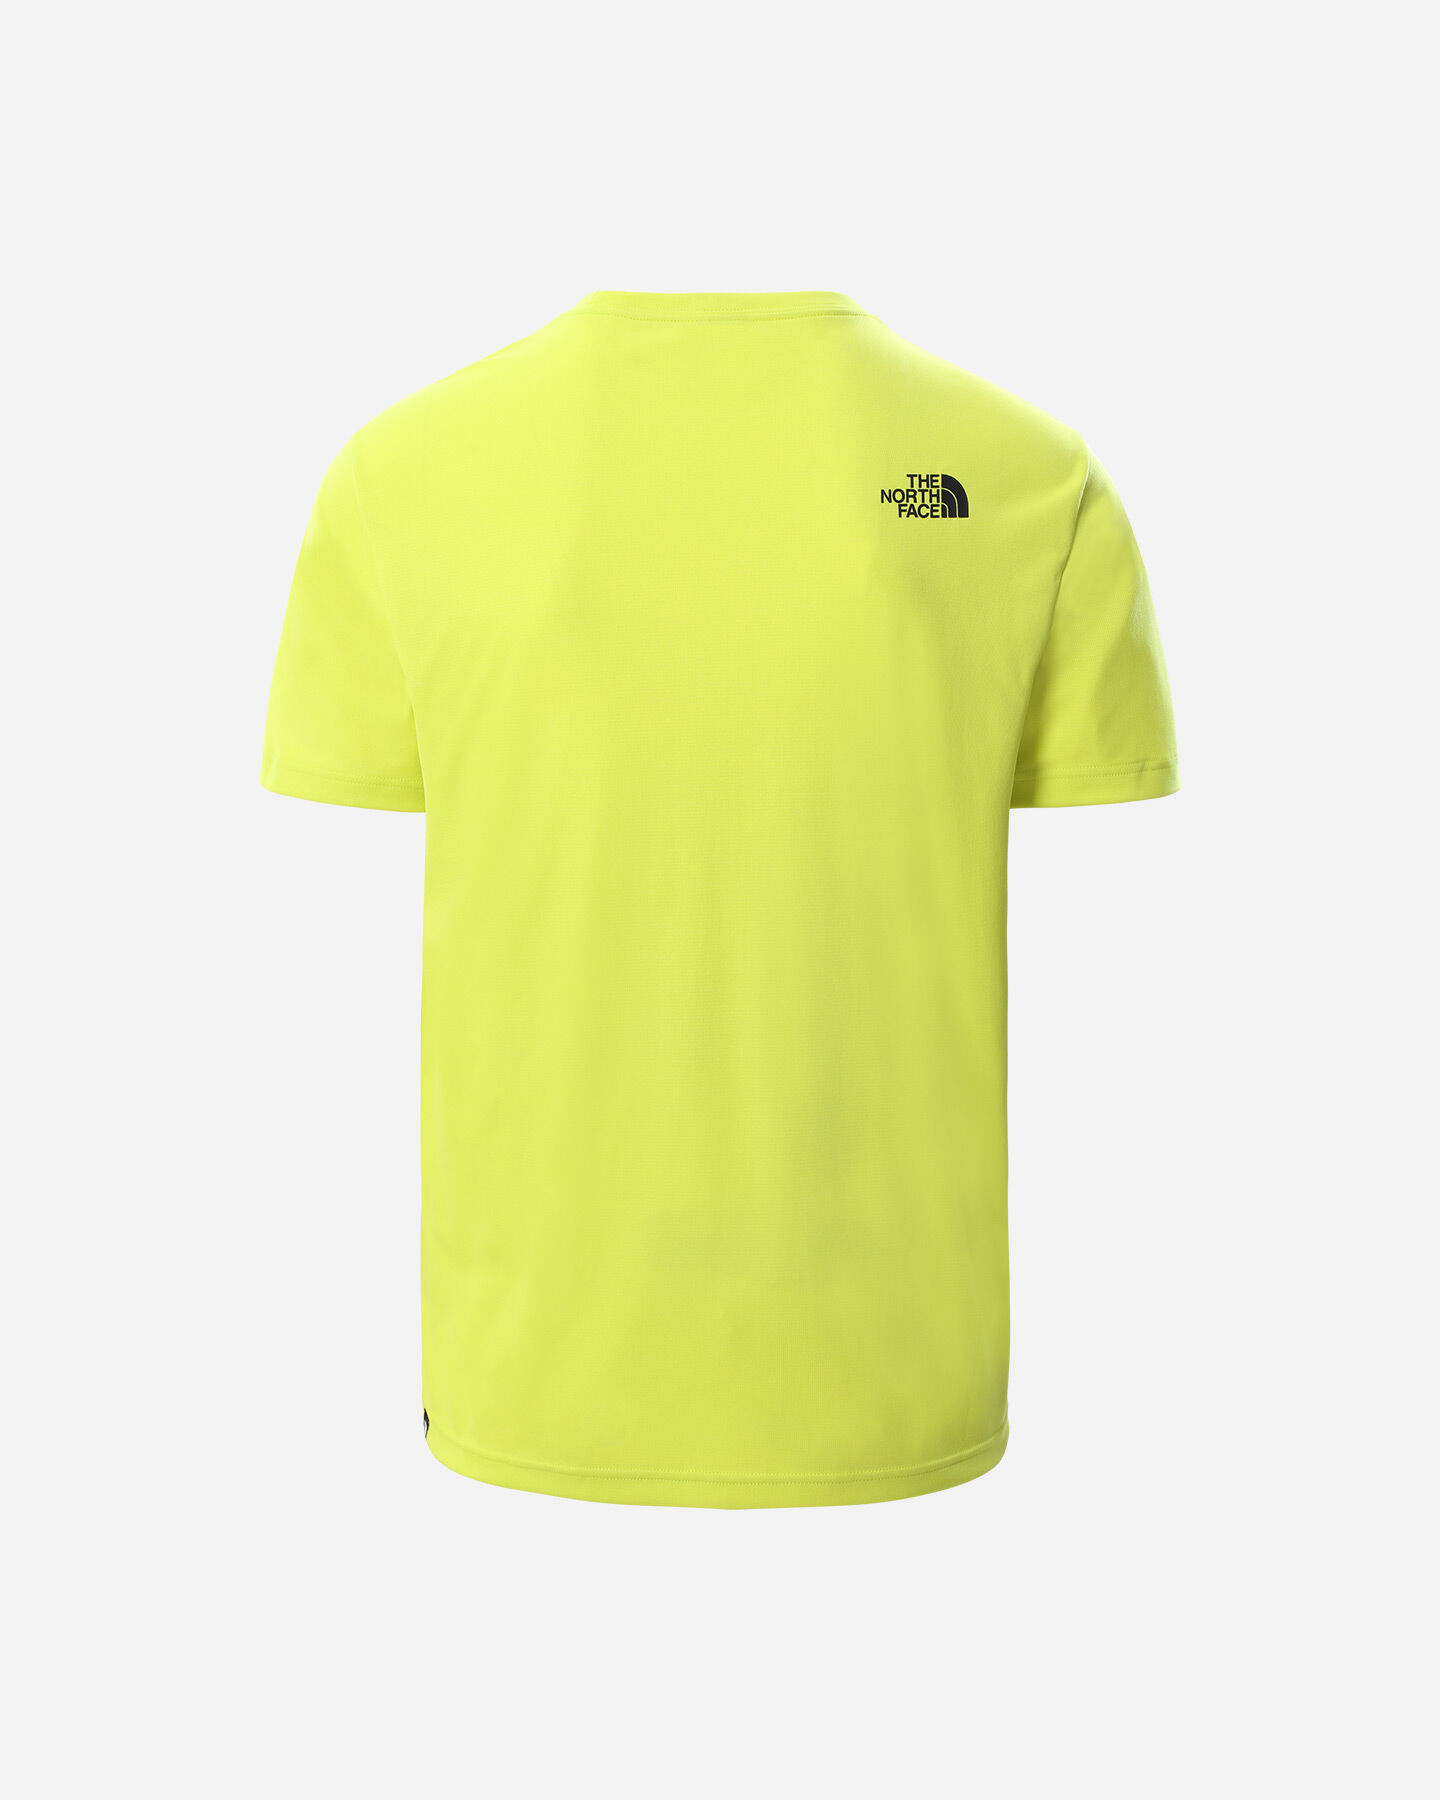  T-Shirt THE NORTH FACE EXTENT III M S5296476|JE3|S scatto 1